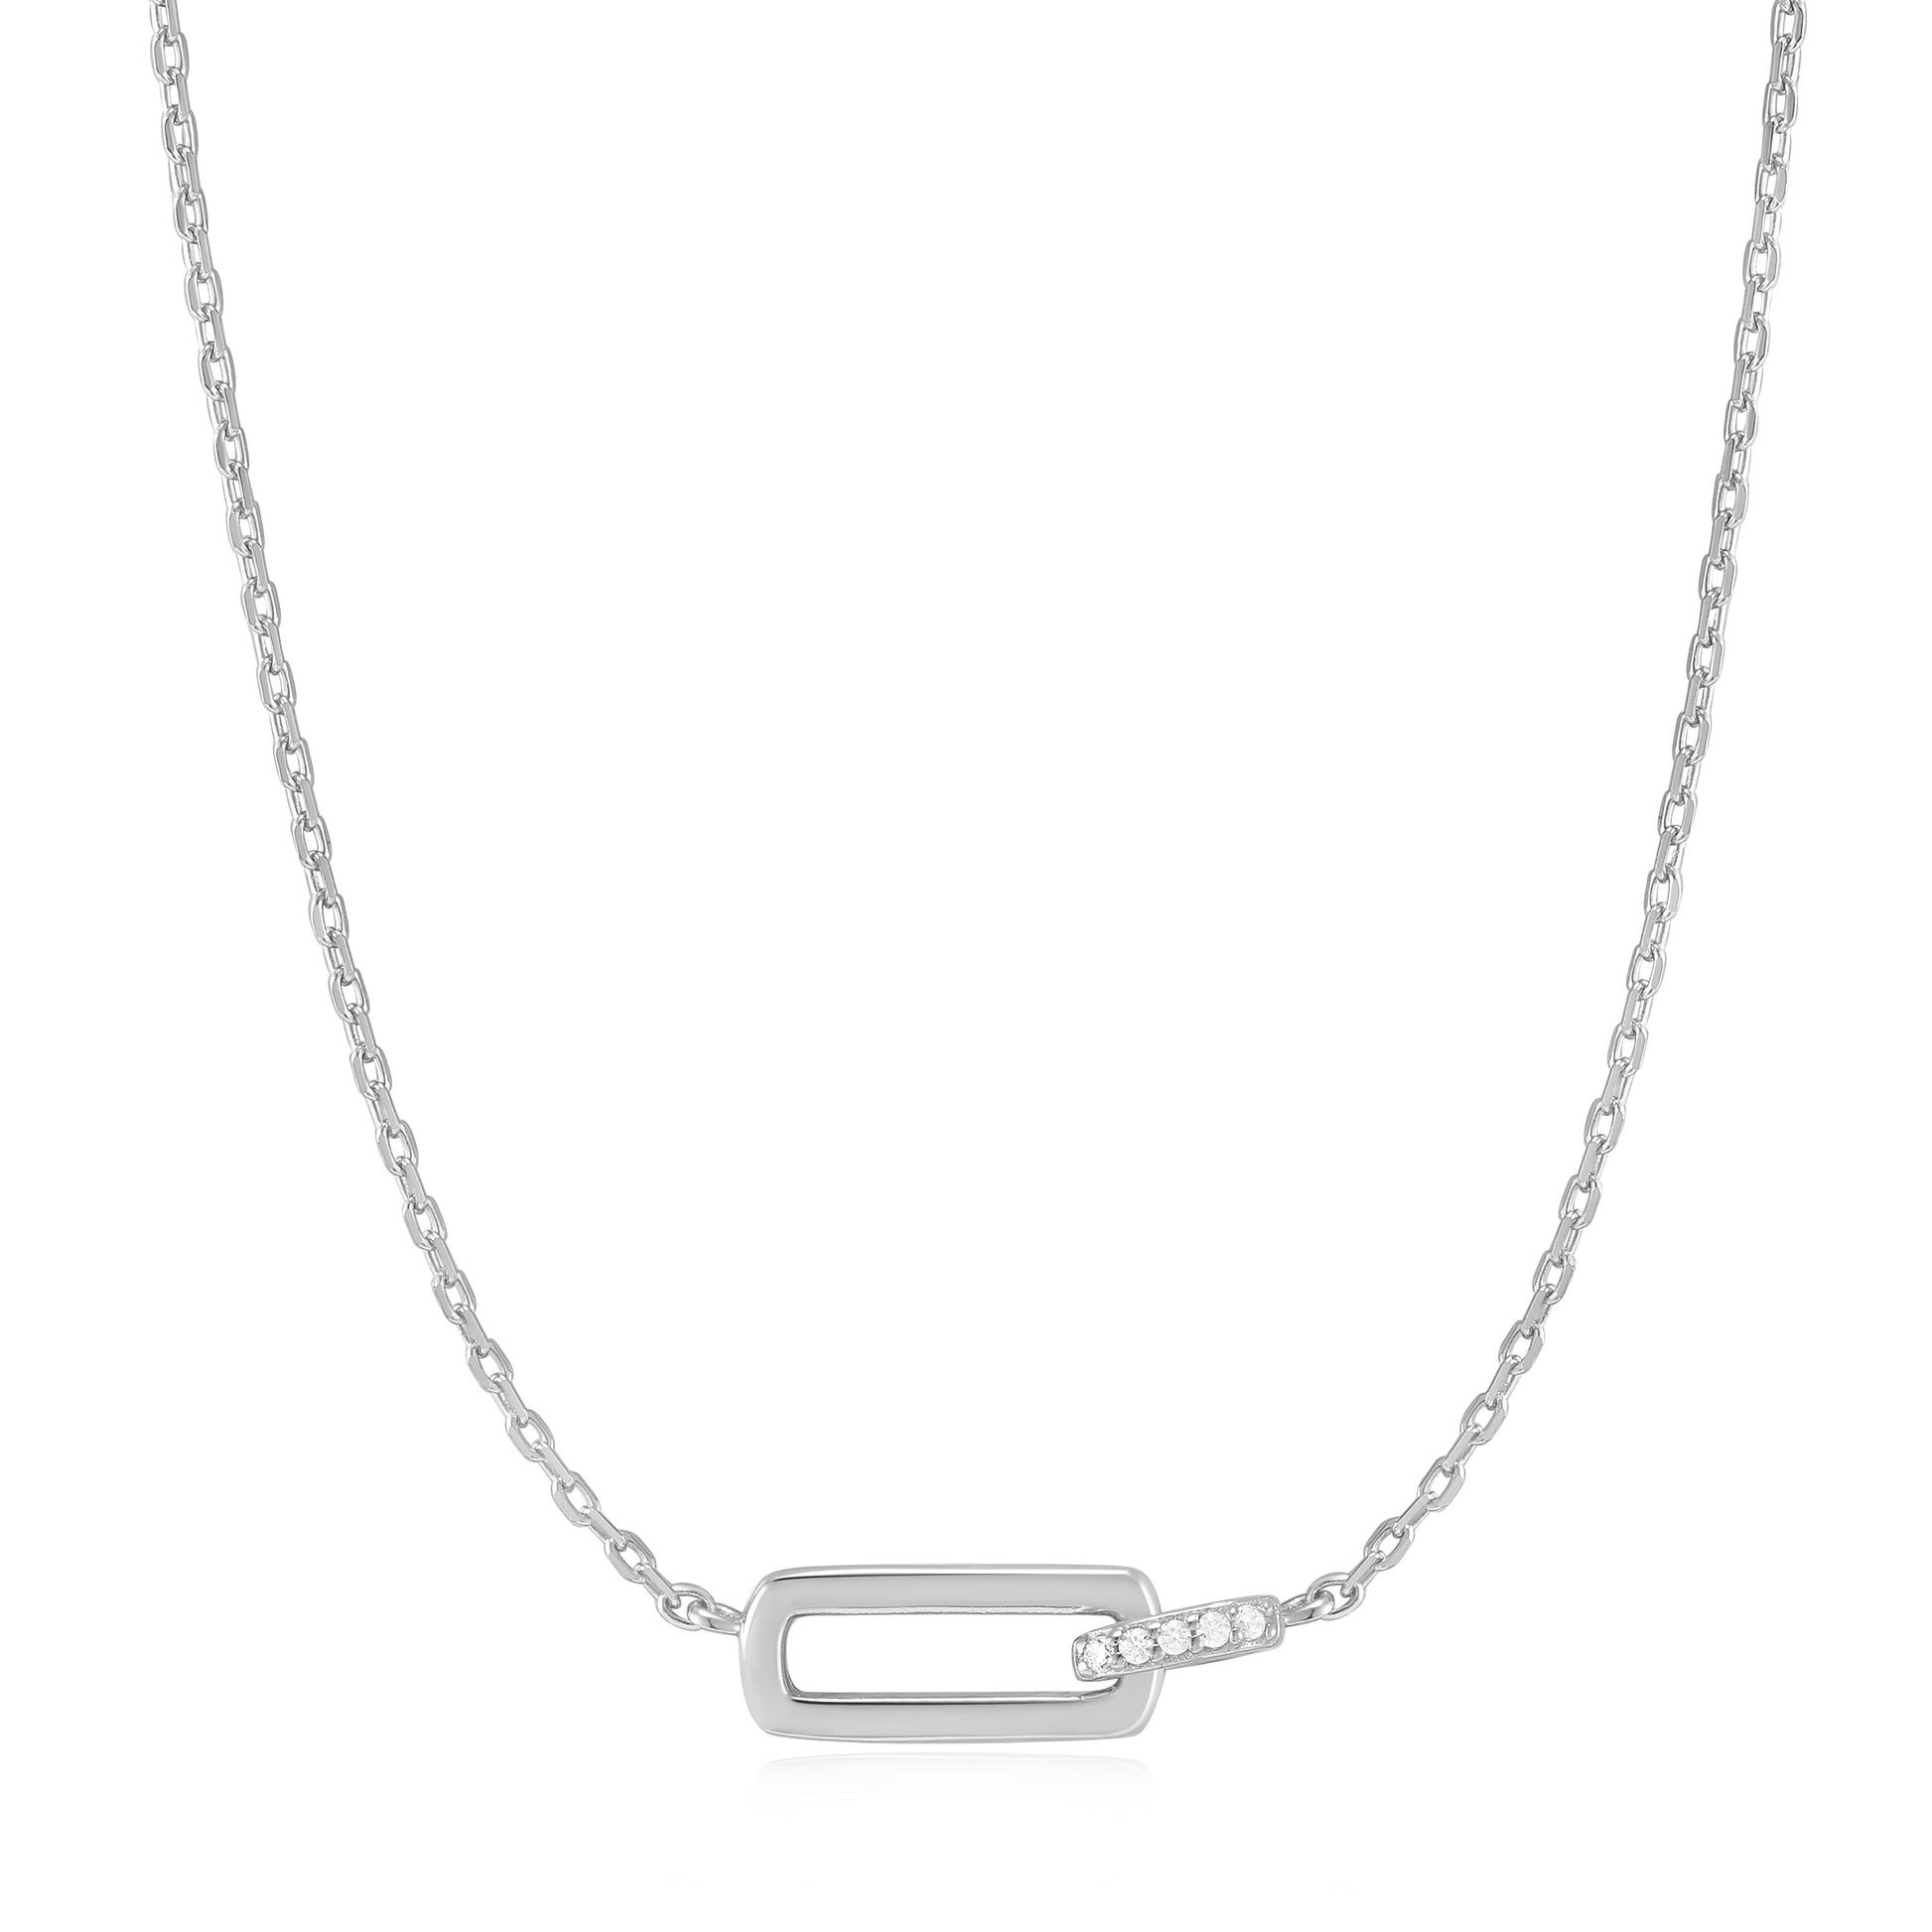 Ania Haie Glam Interlock Necklace - Silver Necklace